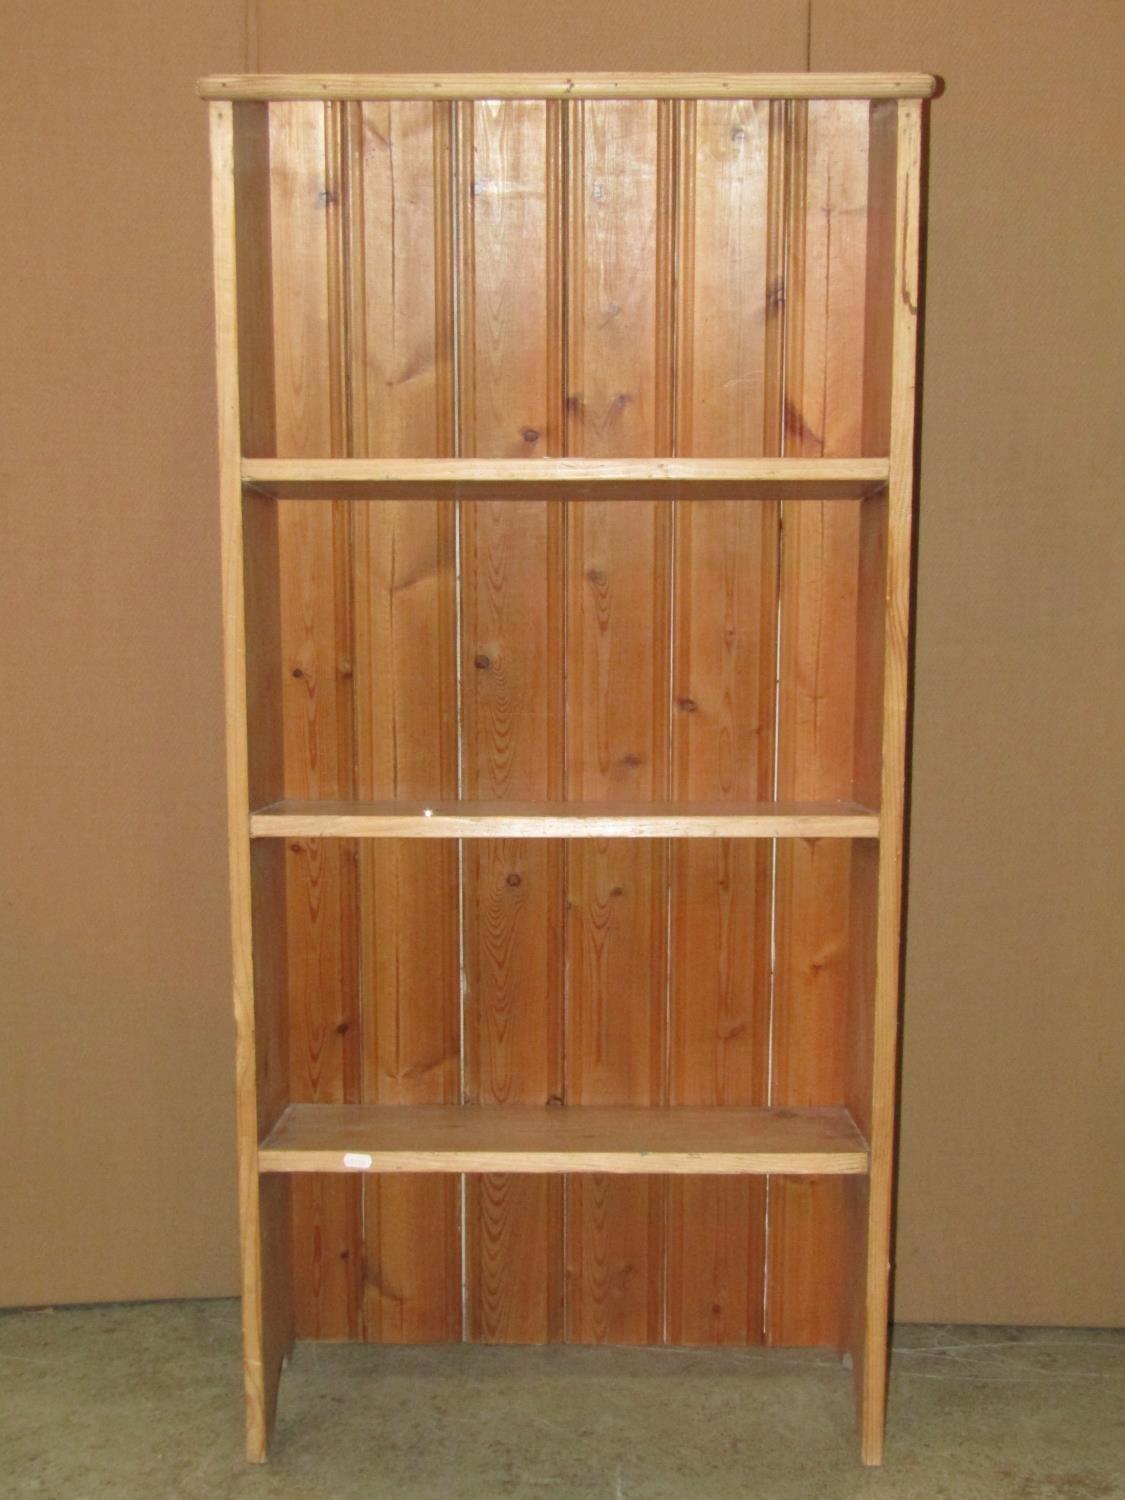 A stripped pine floorstanding shelf unit with three fixed sloping shelves, 63 cm wide x 28 cm x